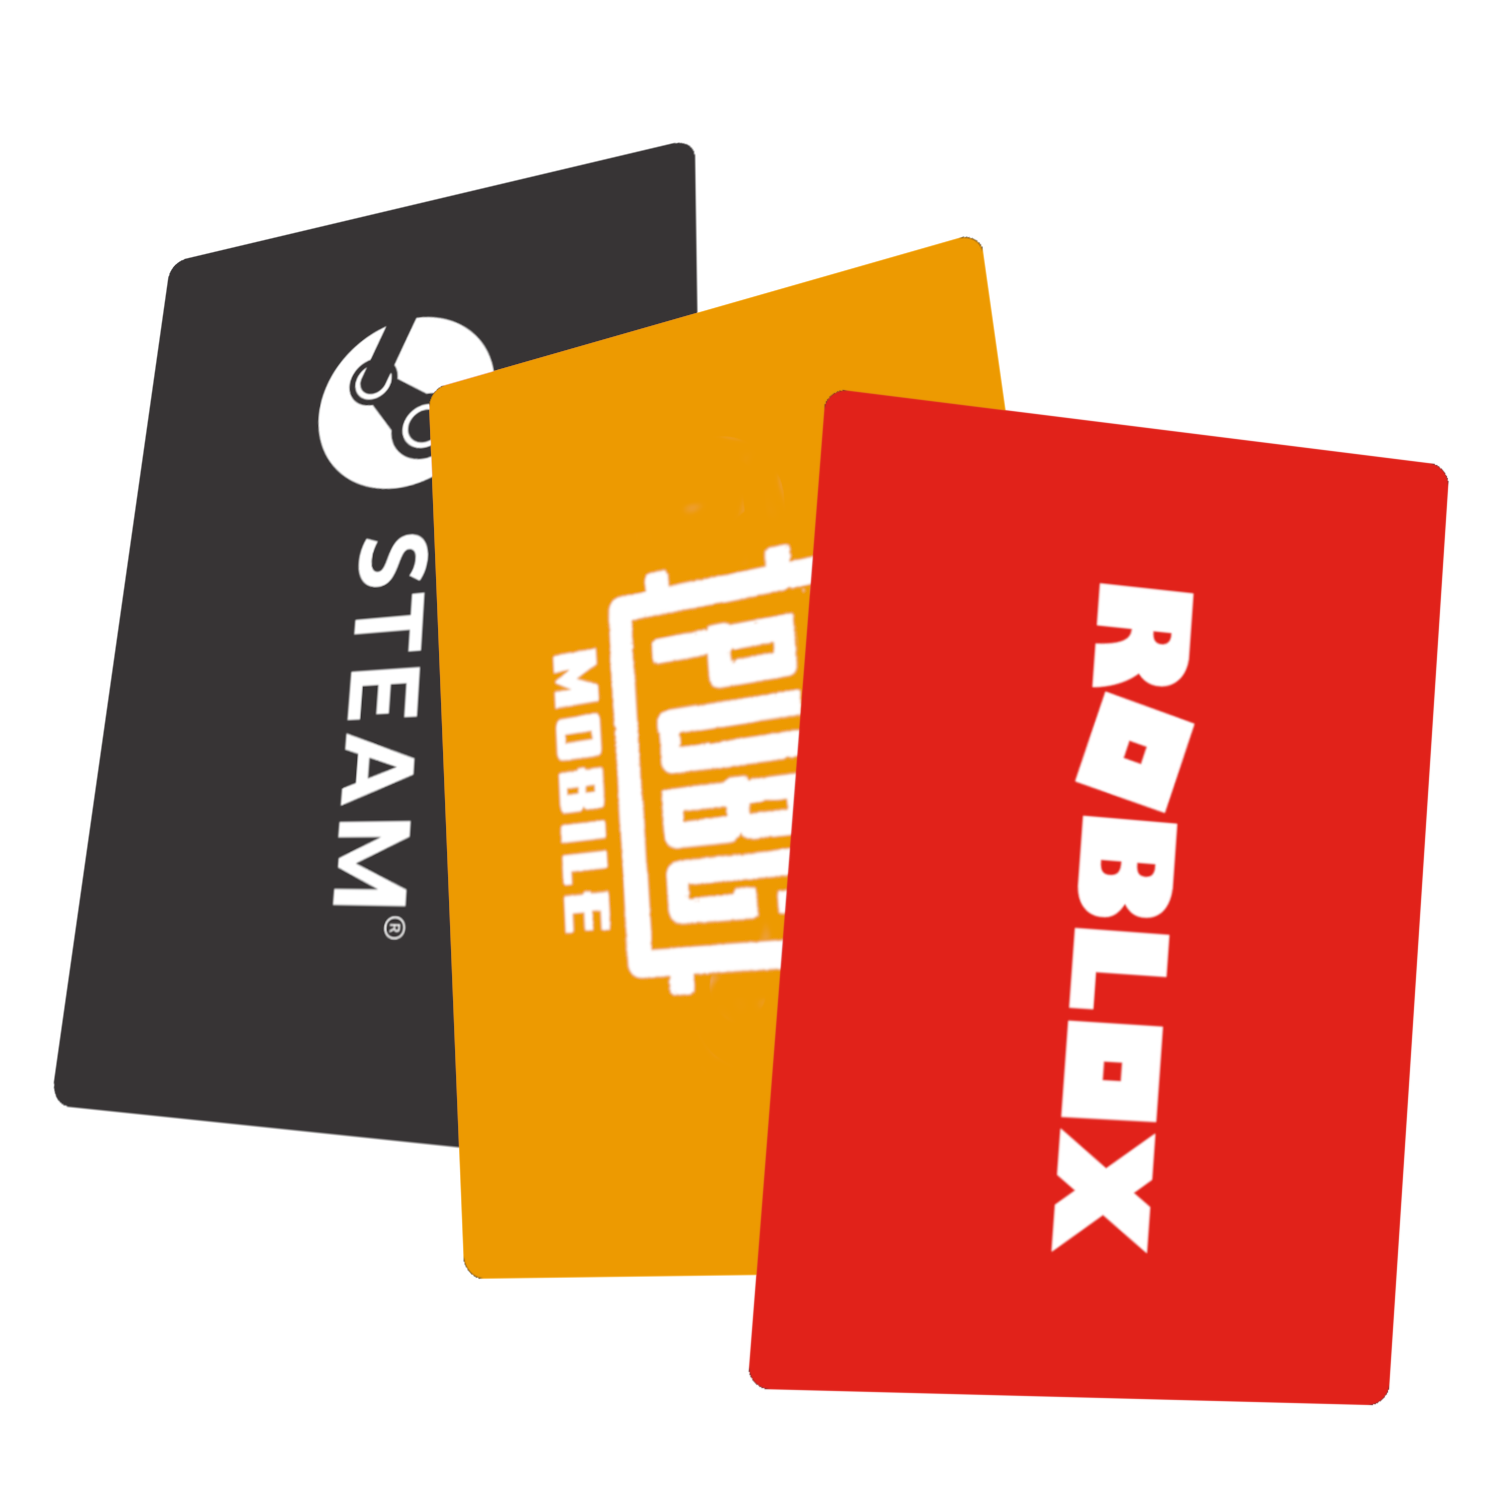 LootX homepage image showing various gift cards